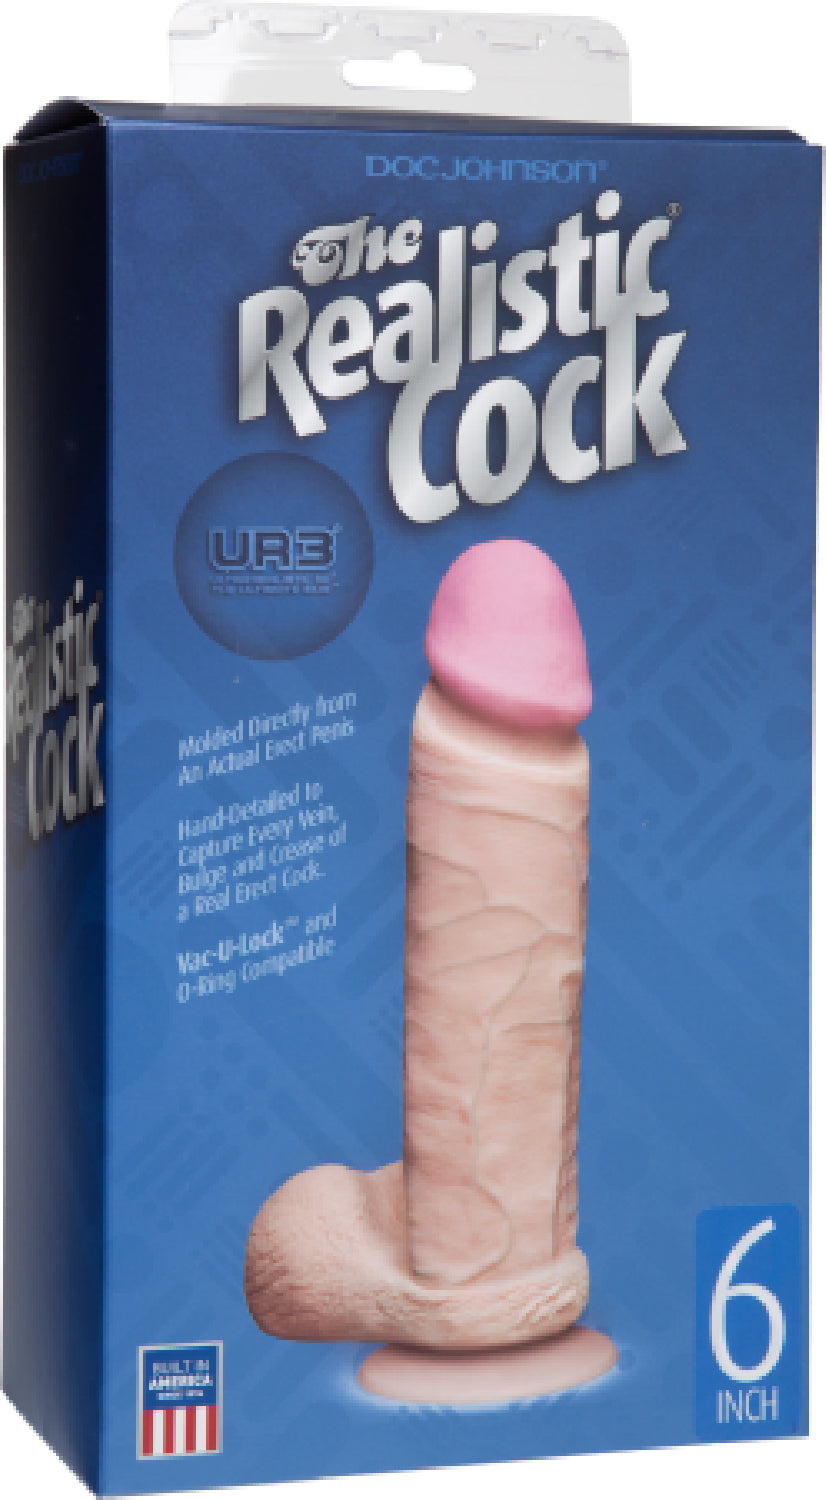 The Realistic Cock 6&quot; - Flesh